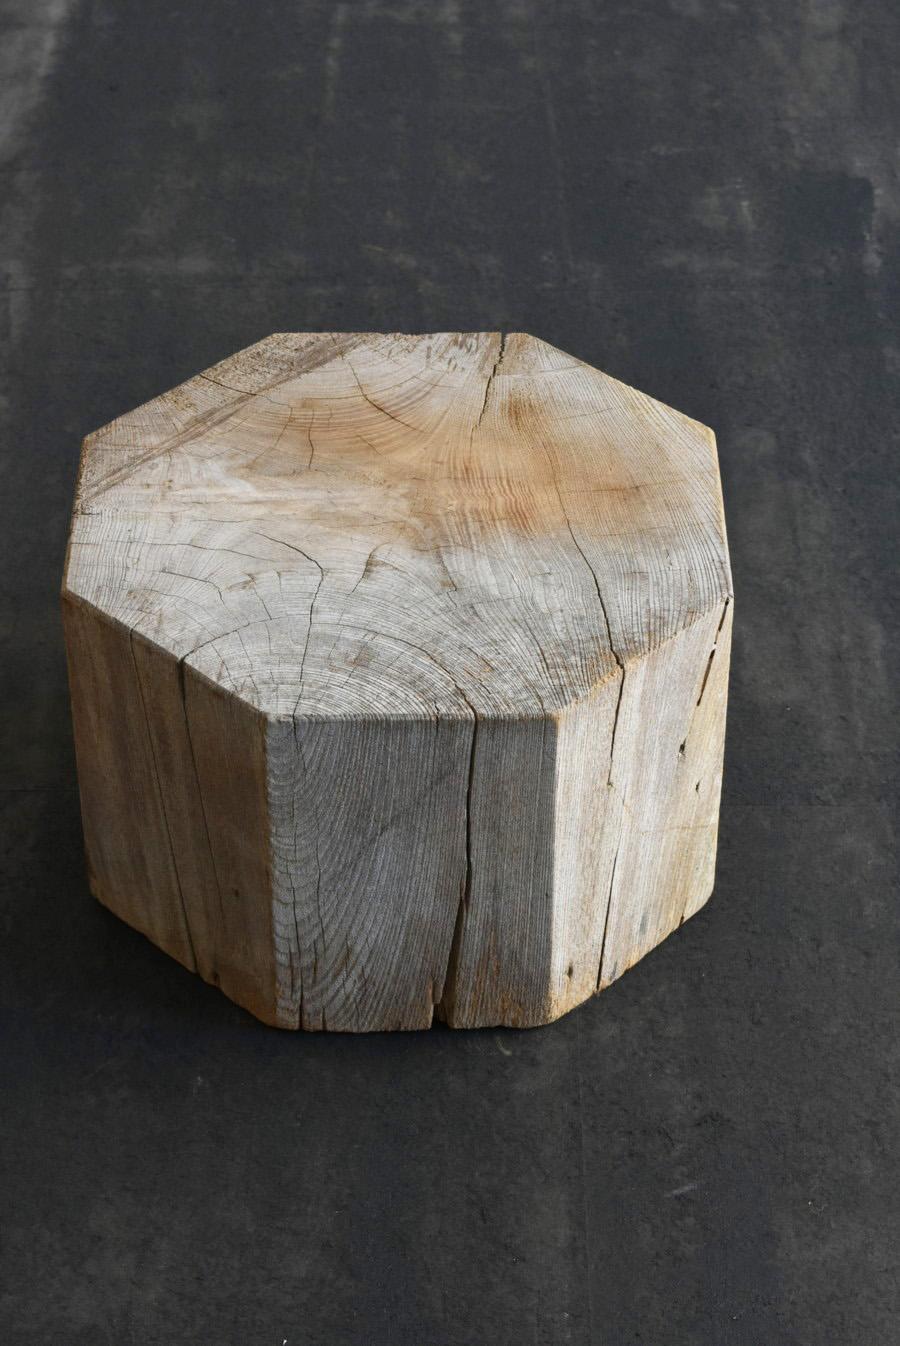 This is an old Japanese octagonal pedestal.
The Material is zelkova wood.
It is believed to have been made between the end of the 19th century and the beginning of the 20th century (1880-1920).
Keyaki is known as a high-grade wood that is